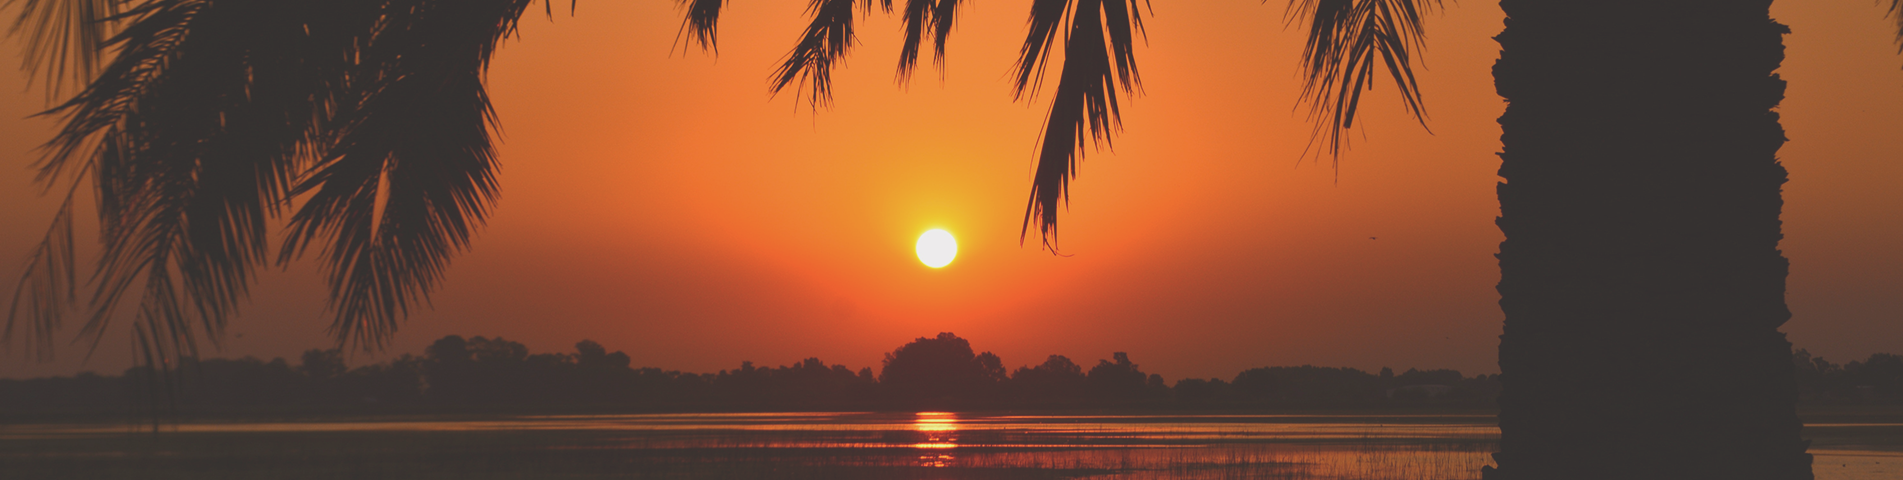 Tropical sunset and silhouettes of palm trees